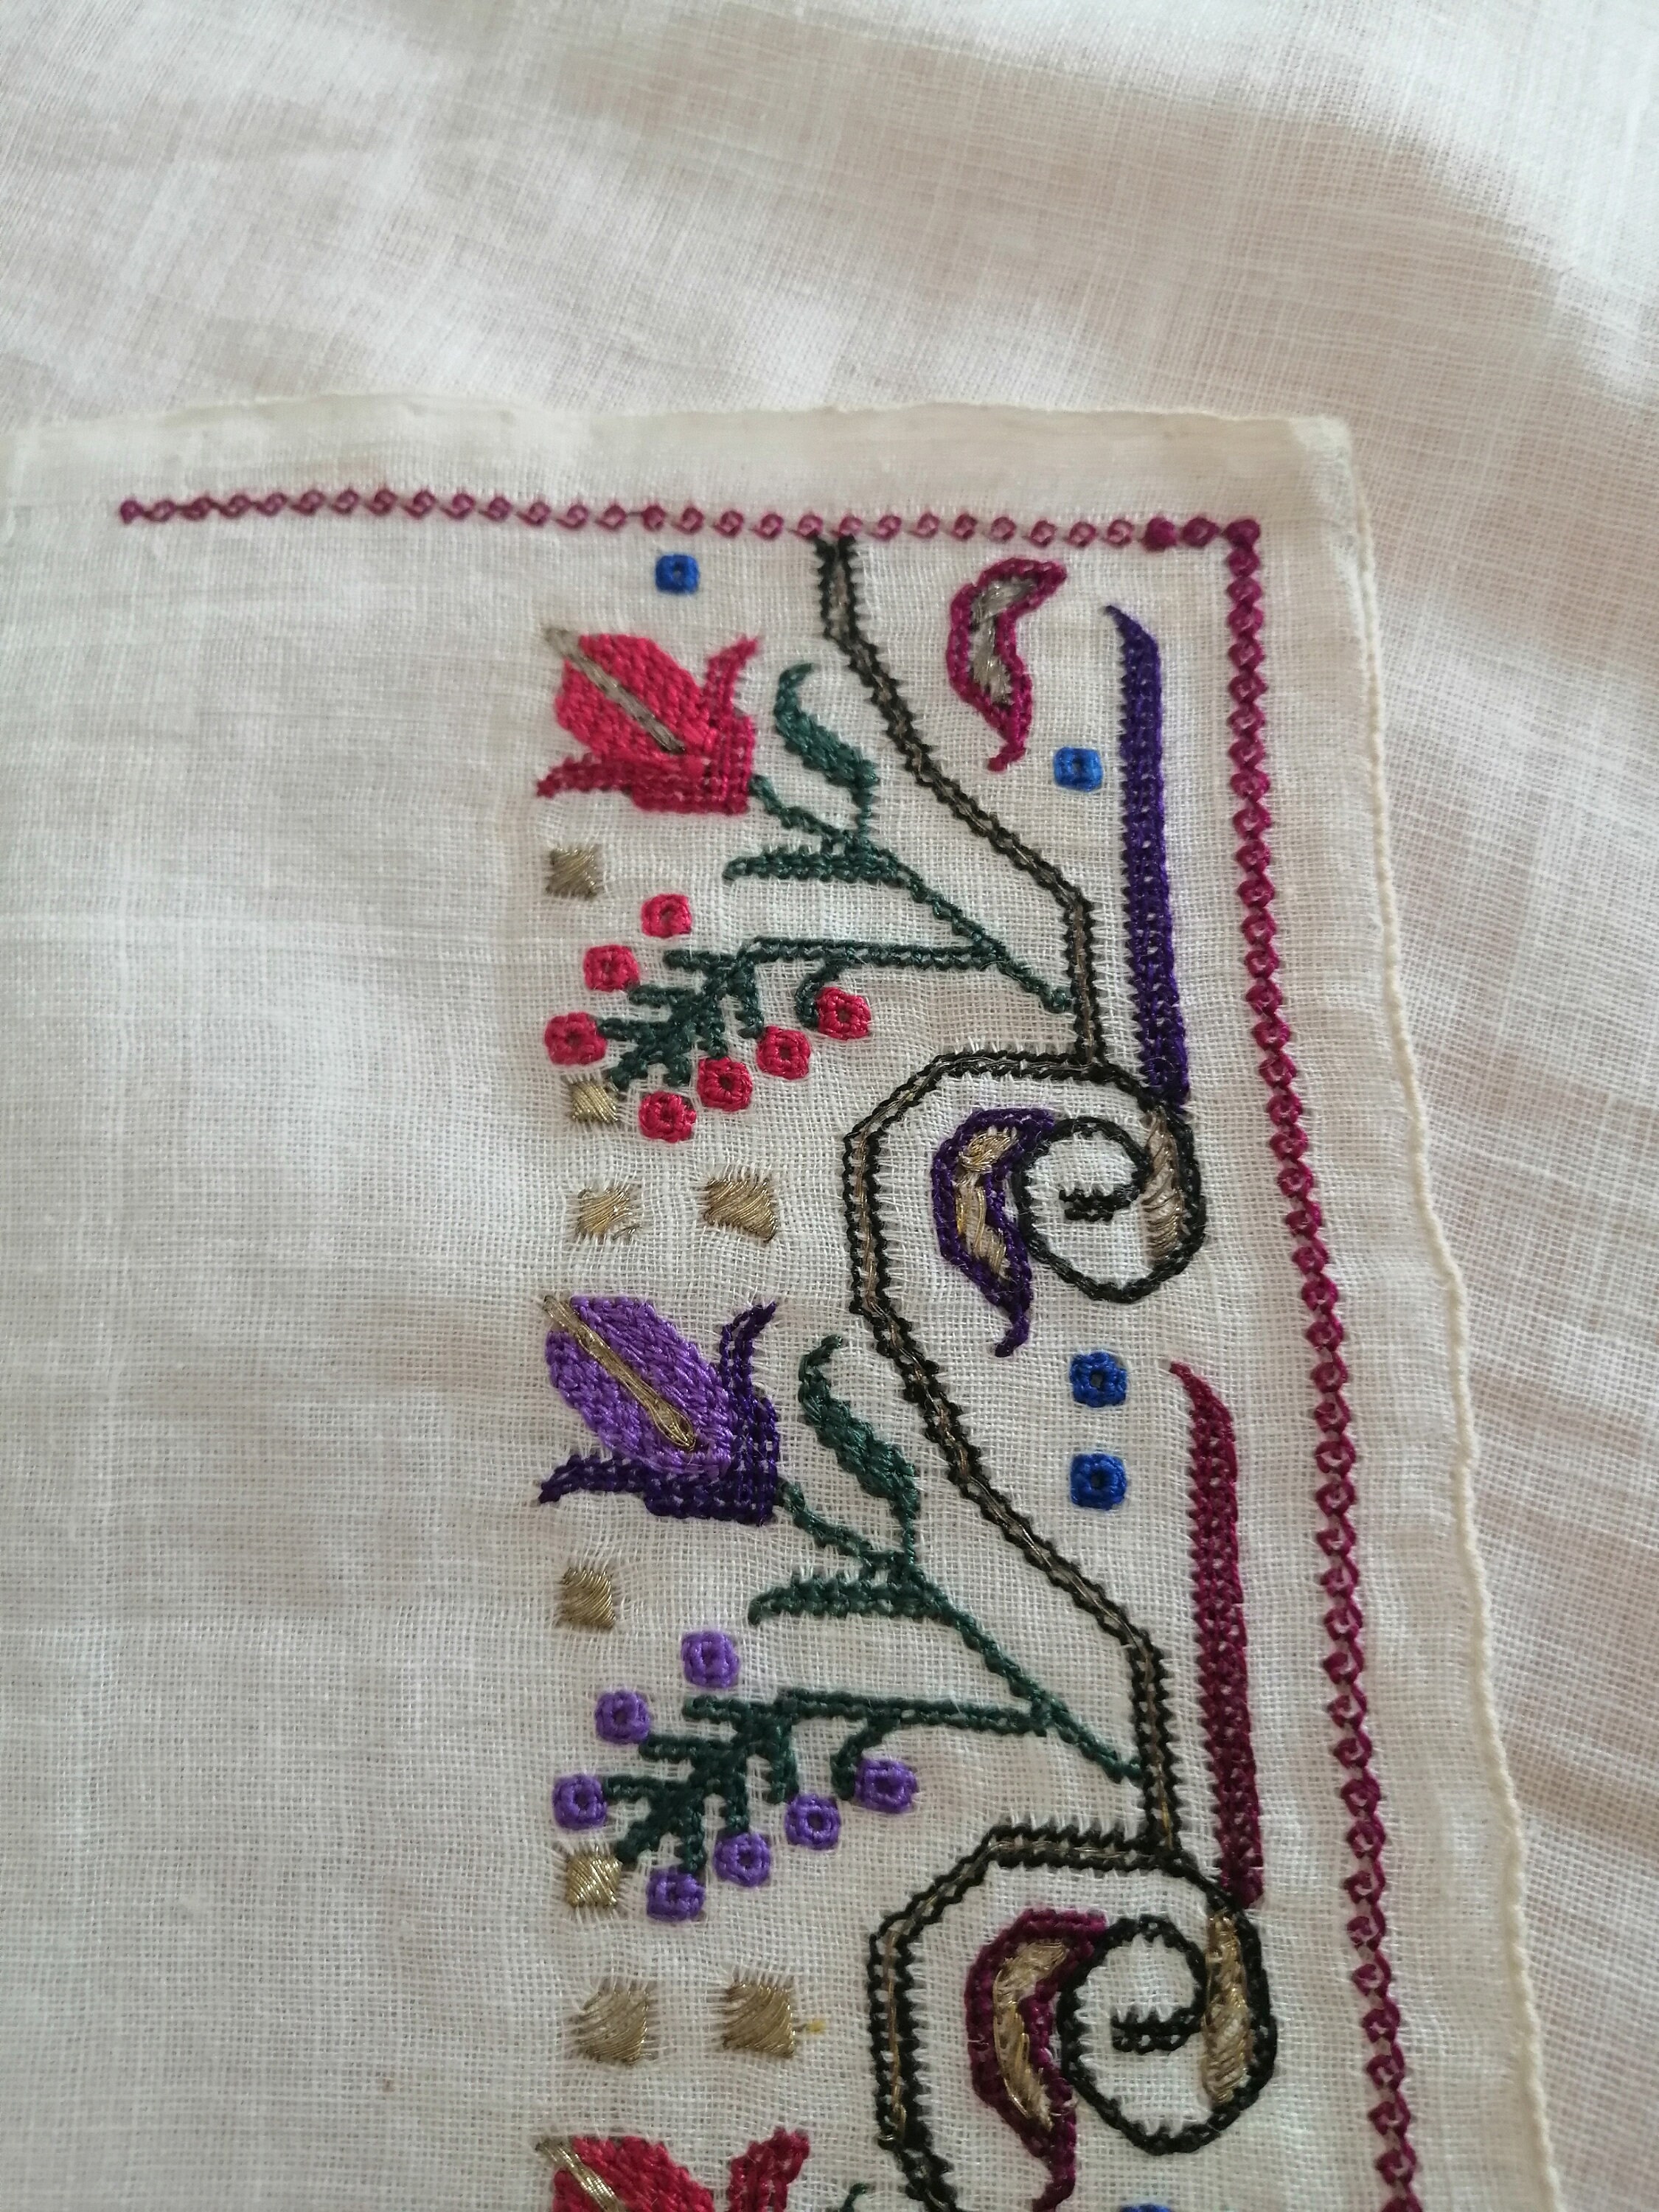 Free Shipping Over 100 Years Old Handembroidery on Handwoven - Etsy